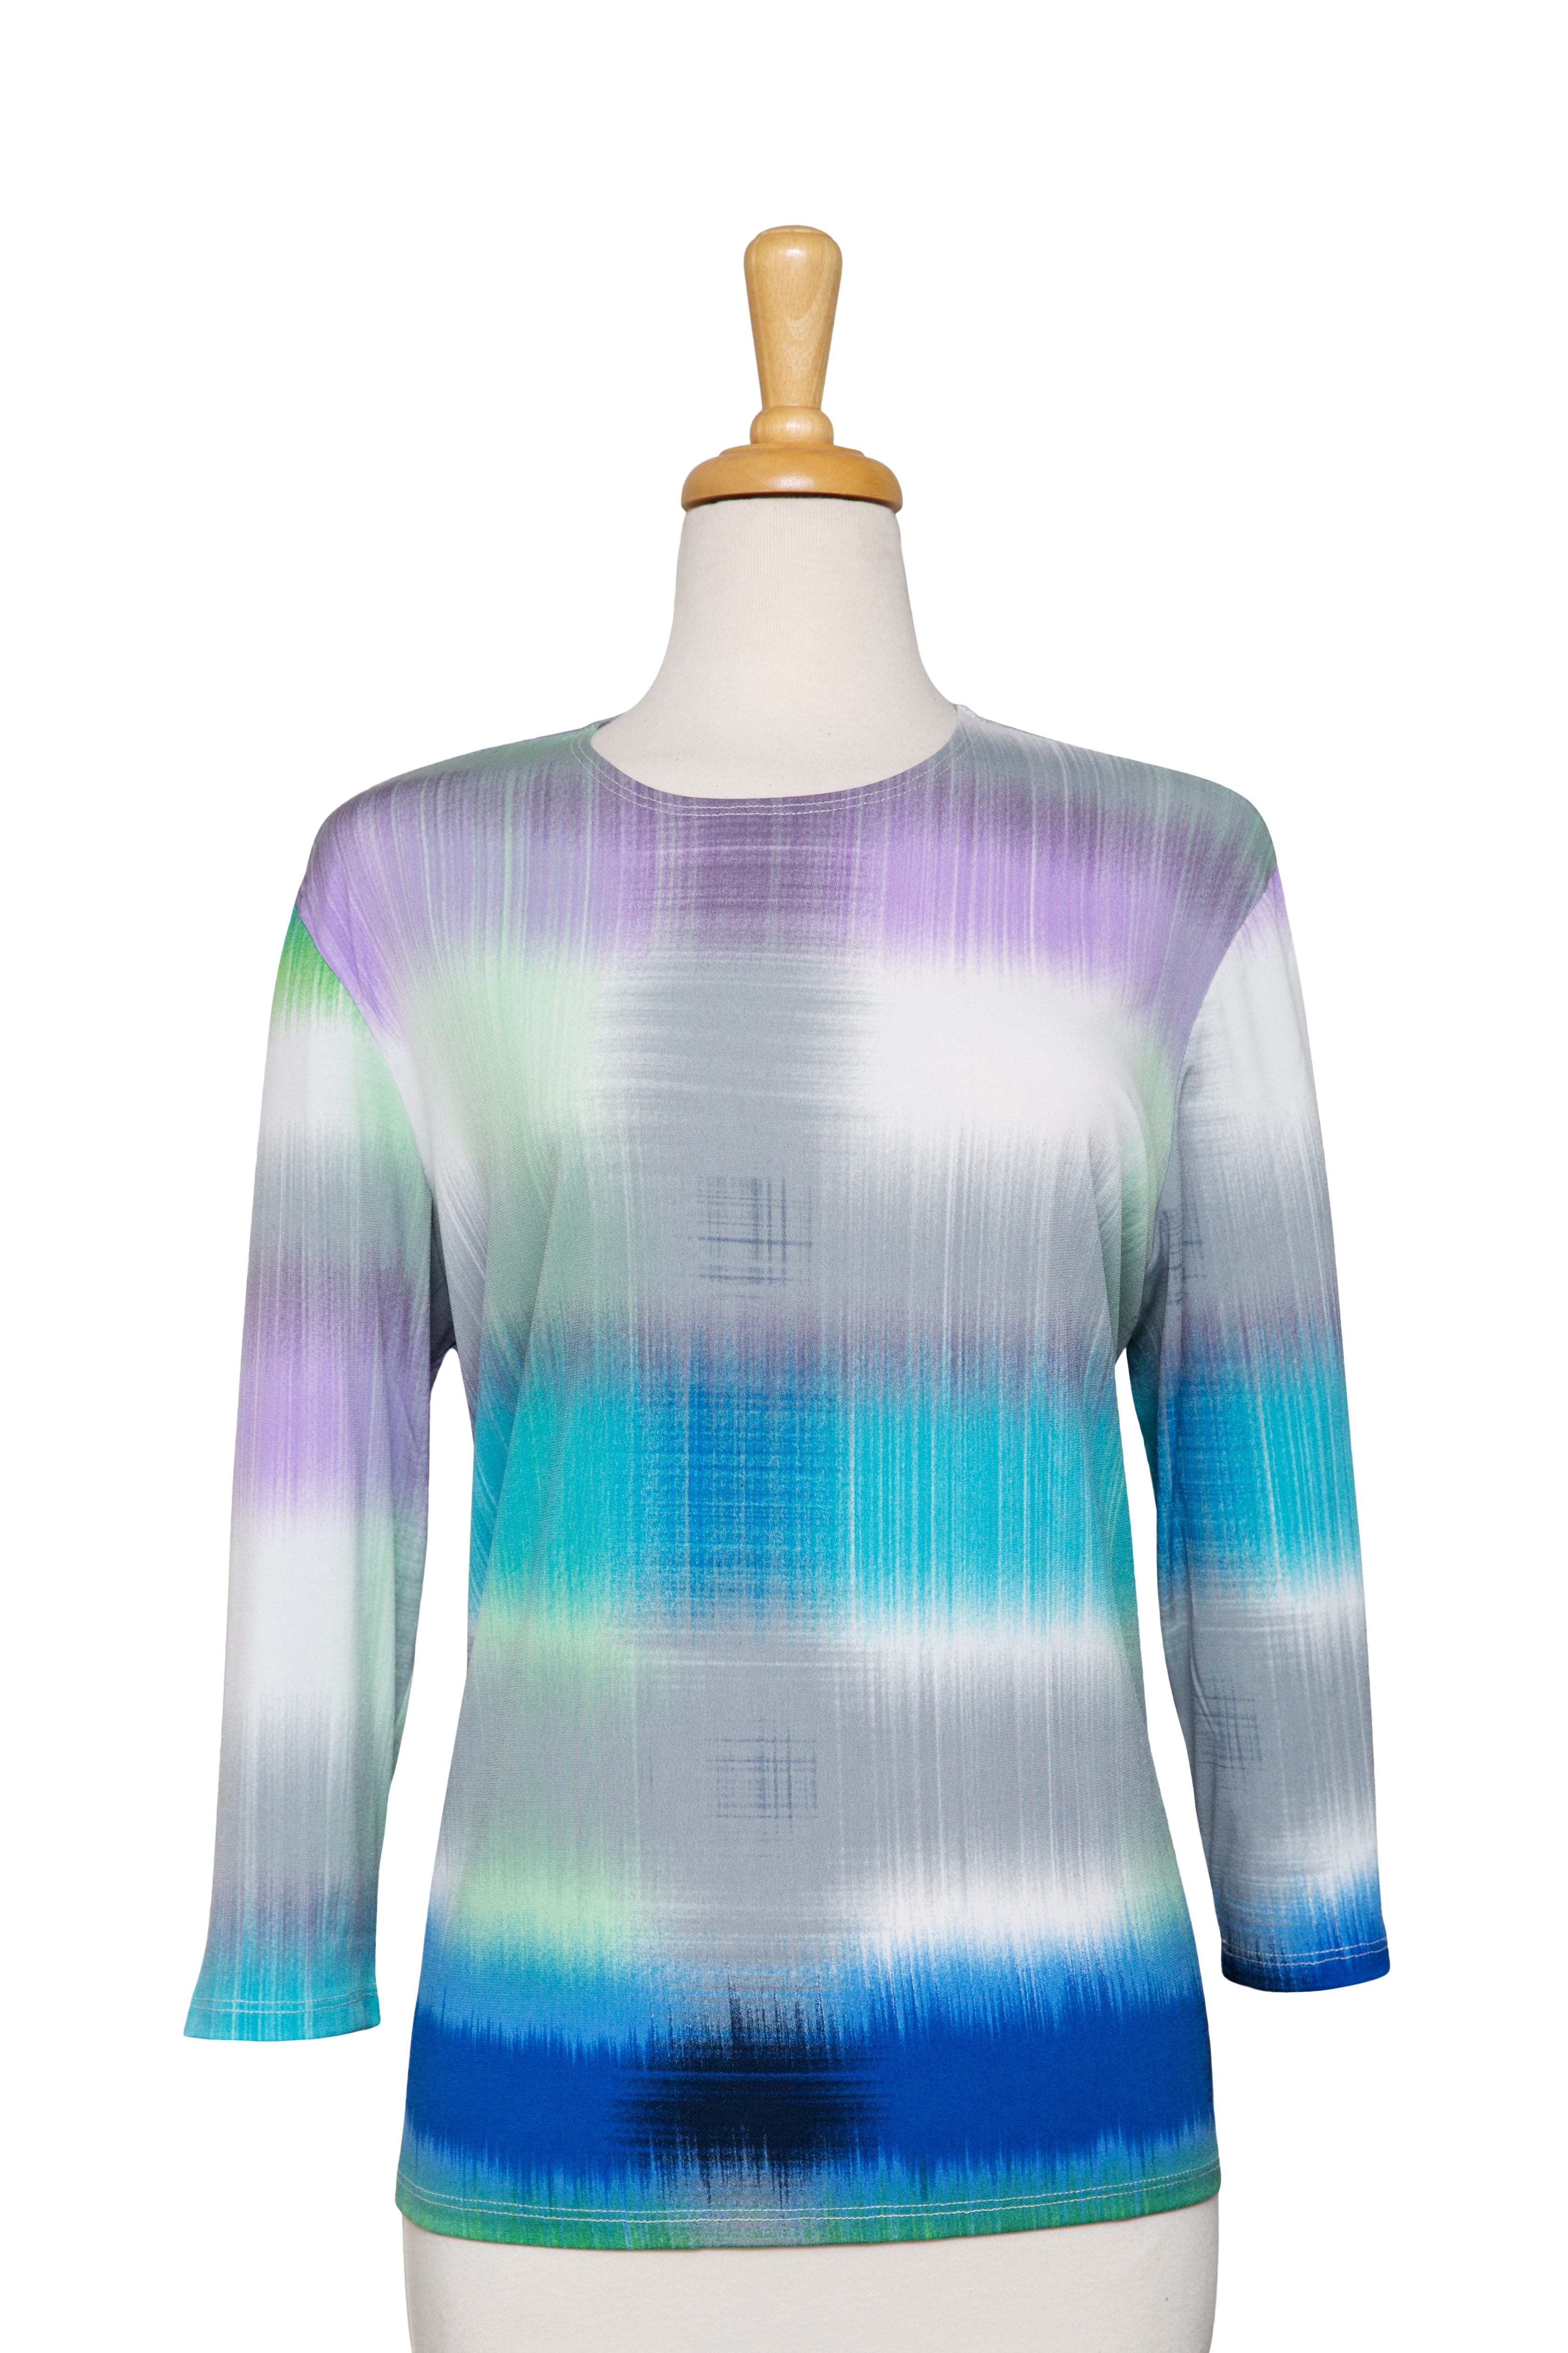 Shades of Blue, Purple and Grey Muted Microfiber 3/4 Sleeve Top 